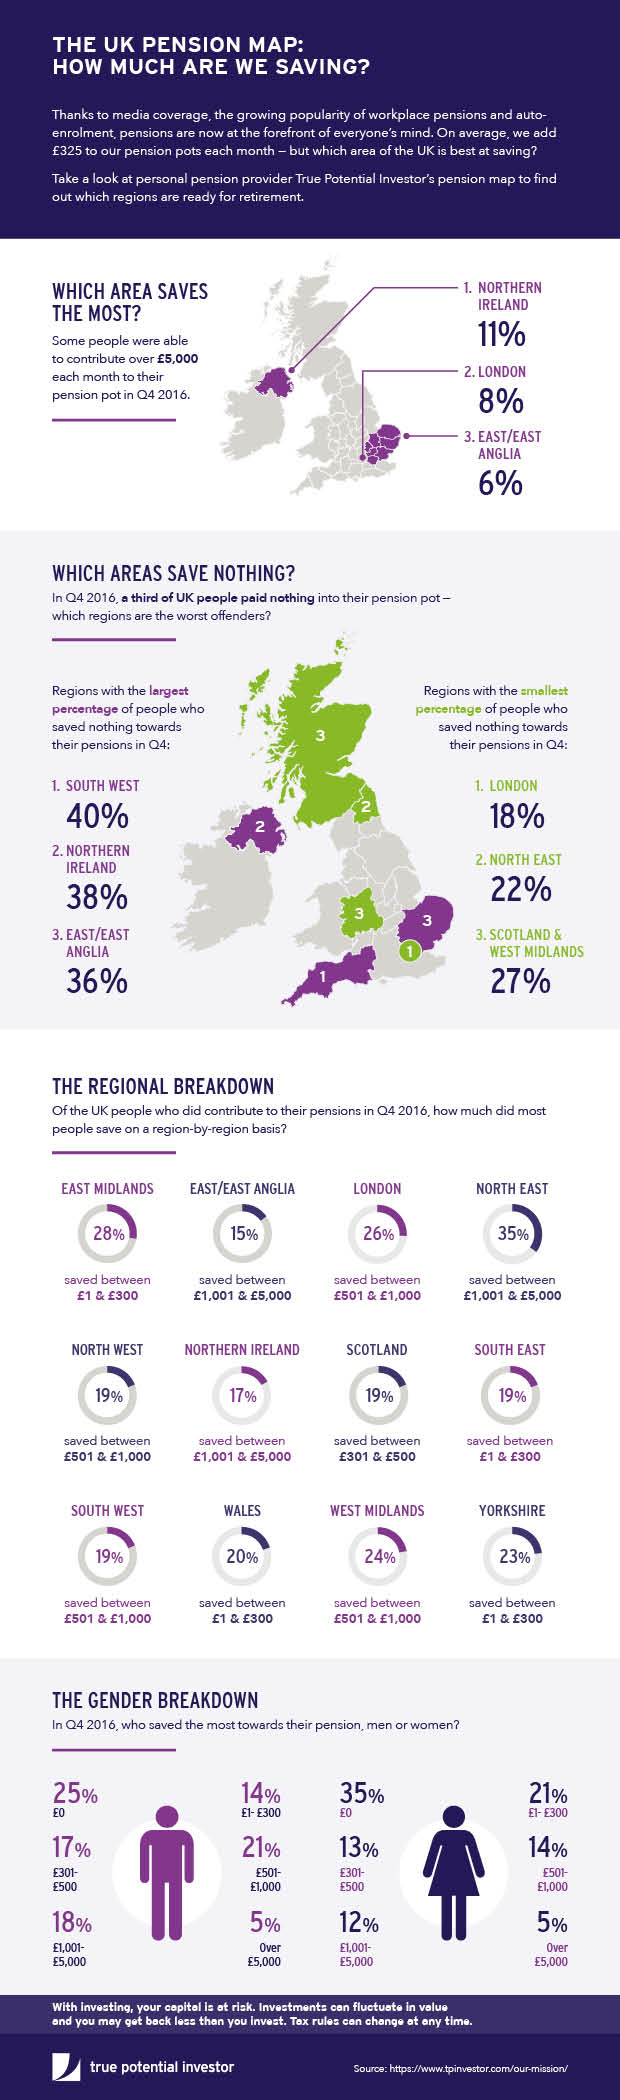 Pensions Map Infographic, Brought To You by UK Fintech Company